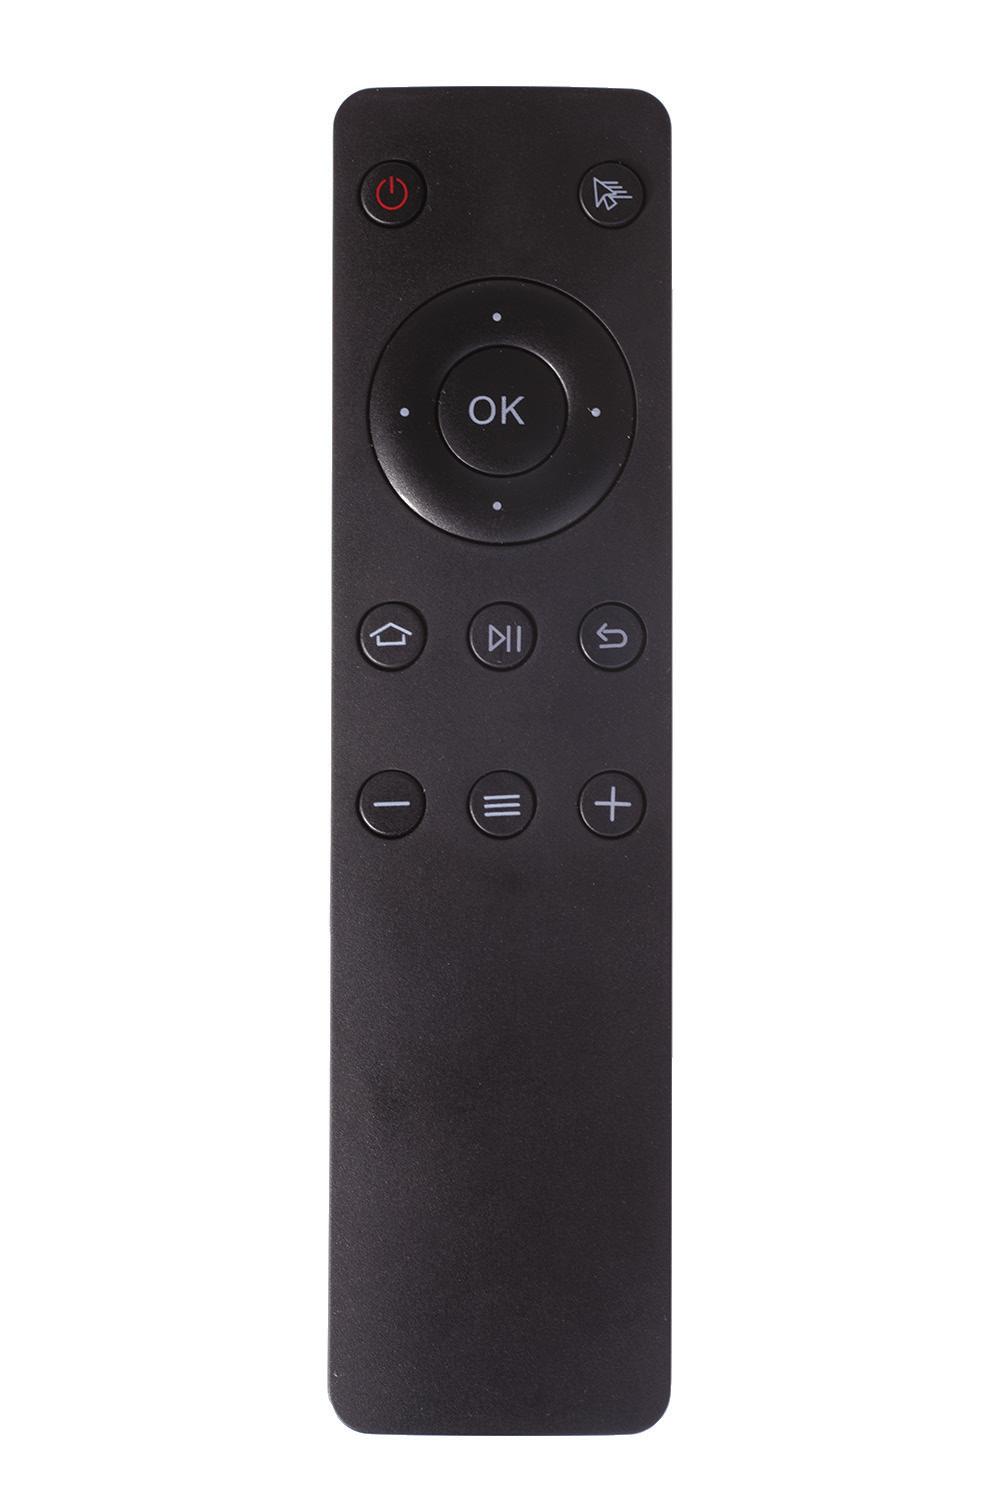 Product Overview Remote 1 2 3 4 5 6 7 8 9 10 1. Power 2. Mouse Toggle 3. Directional Control 4. OK 5. Home 6. Play/Pause 7. Back 8. Volume Down 9. Menu/Options 10.